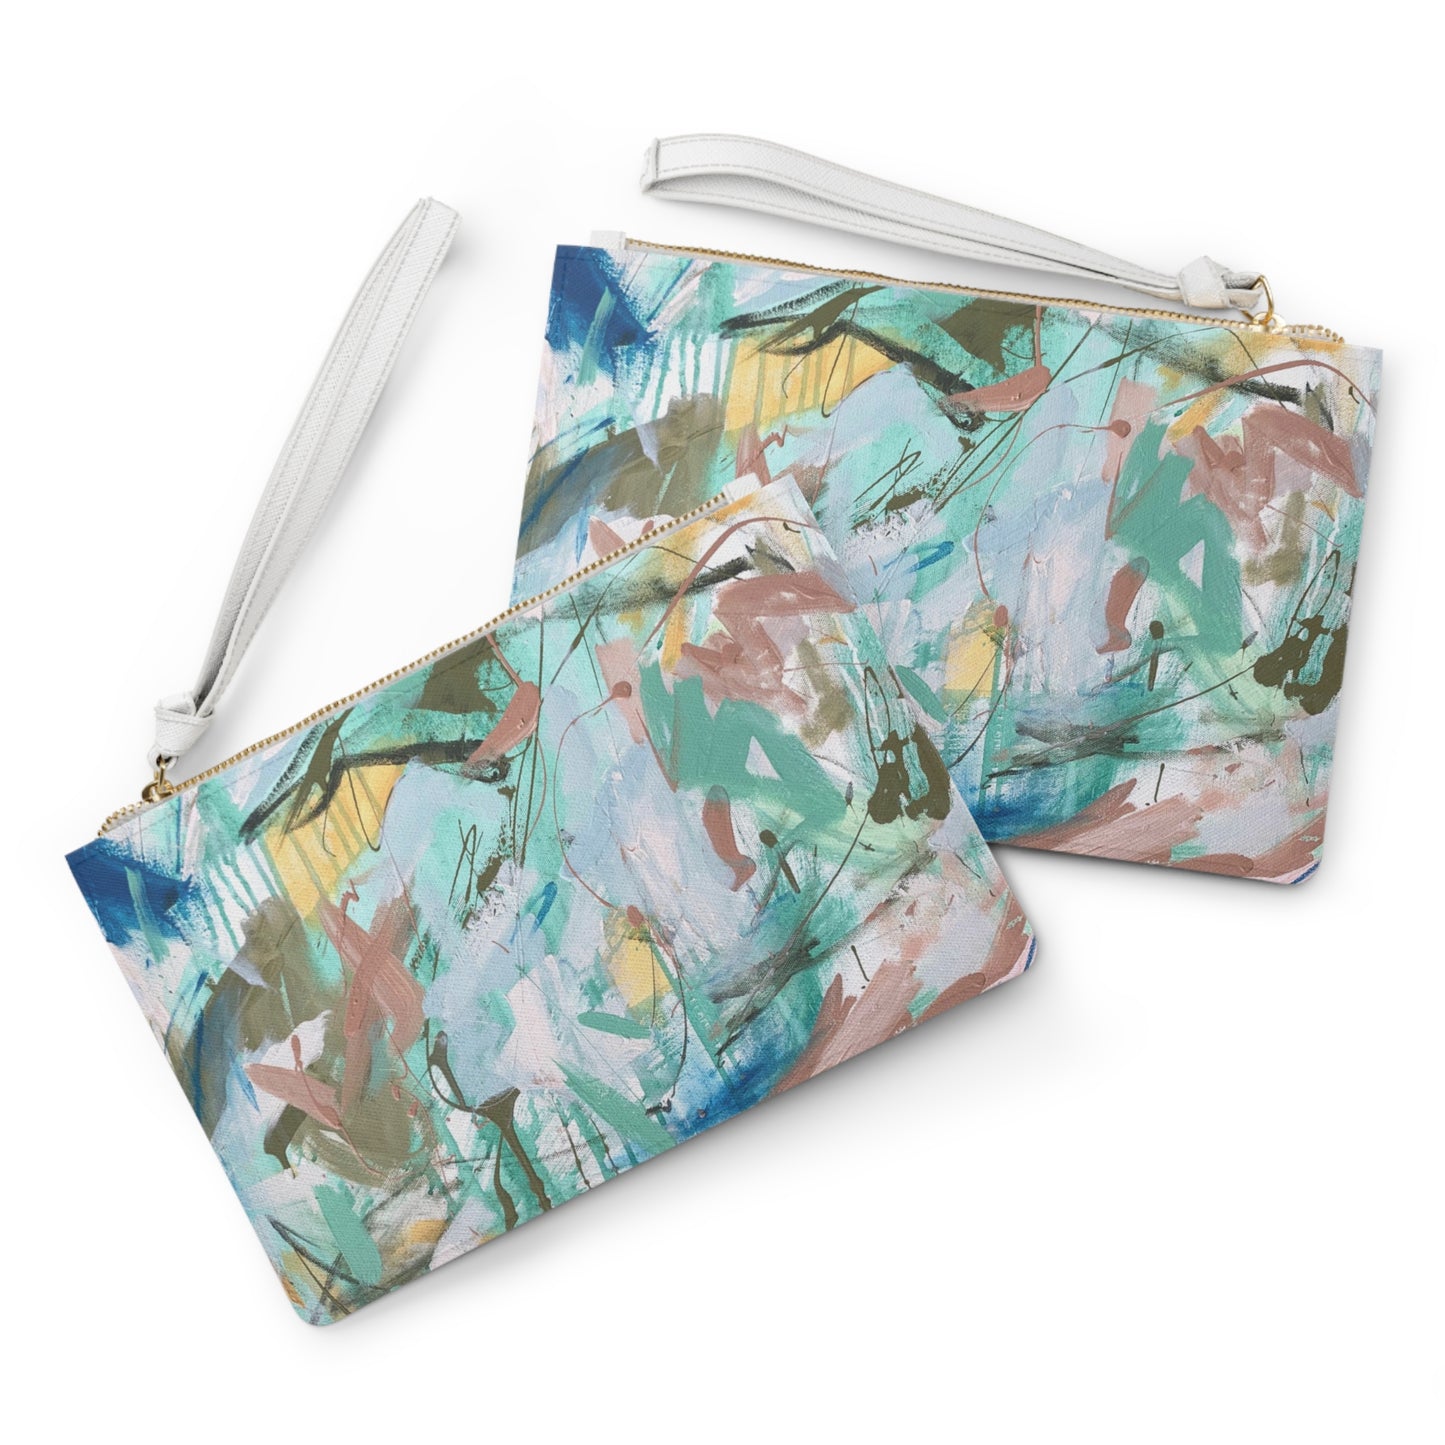 Tropical Hideaway Leather Clutch Bag